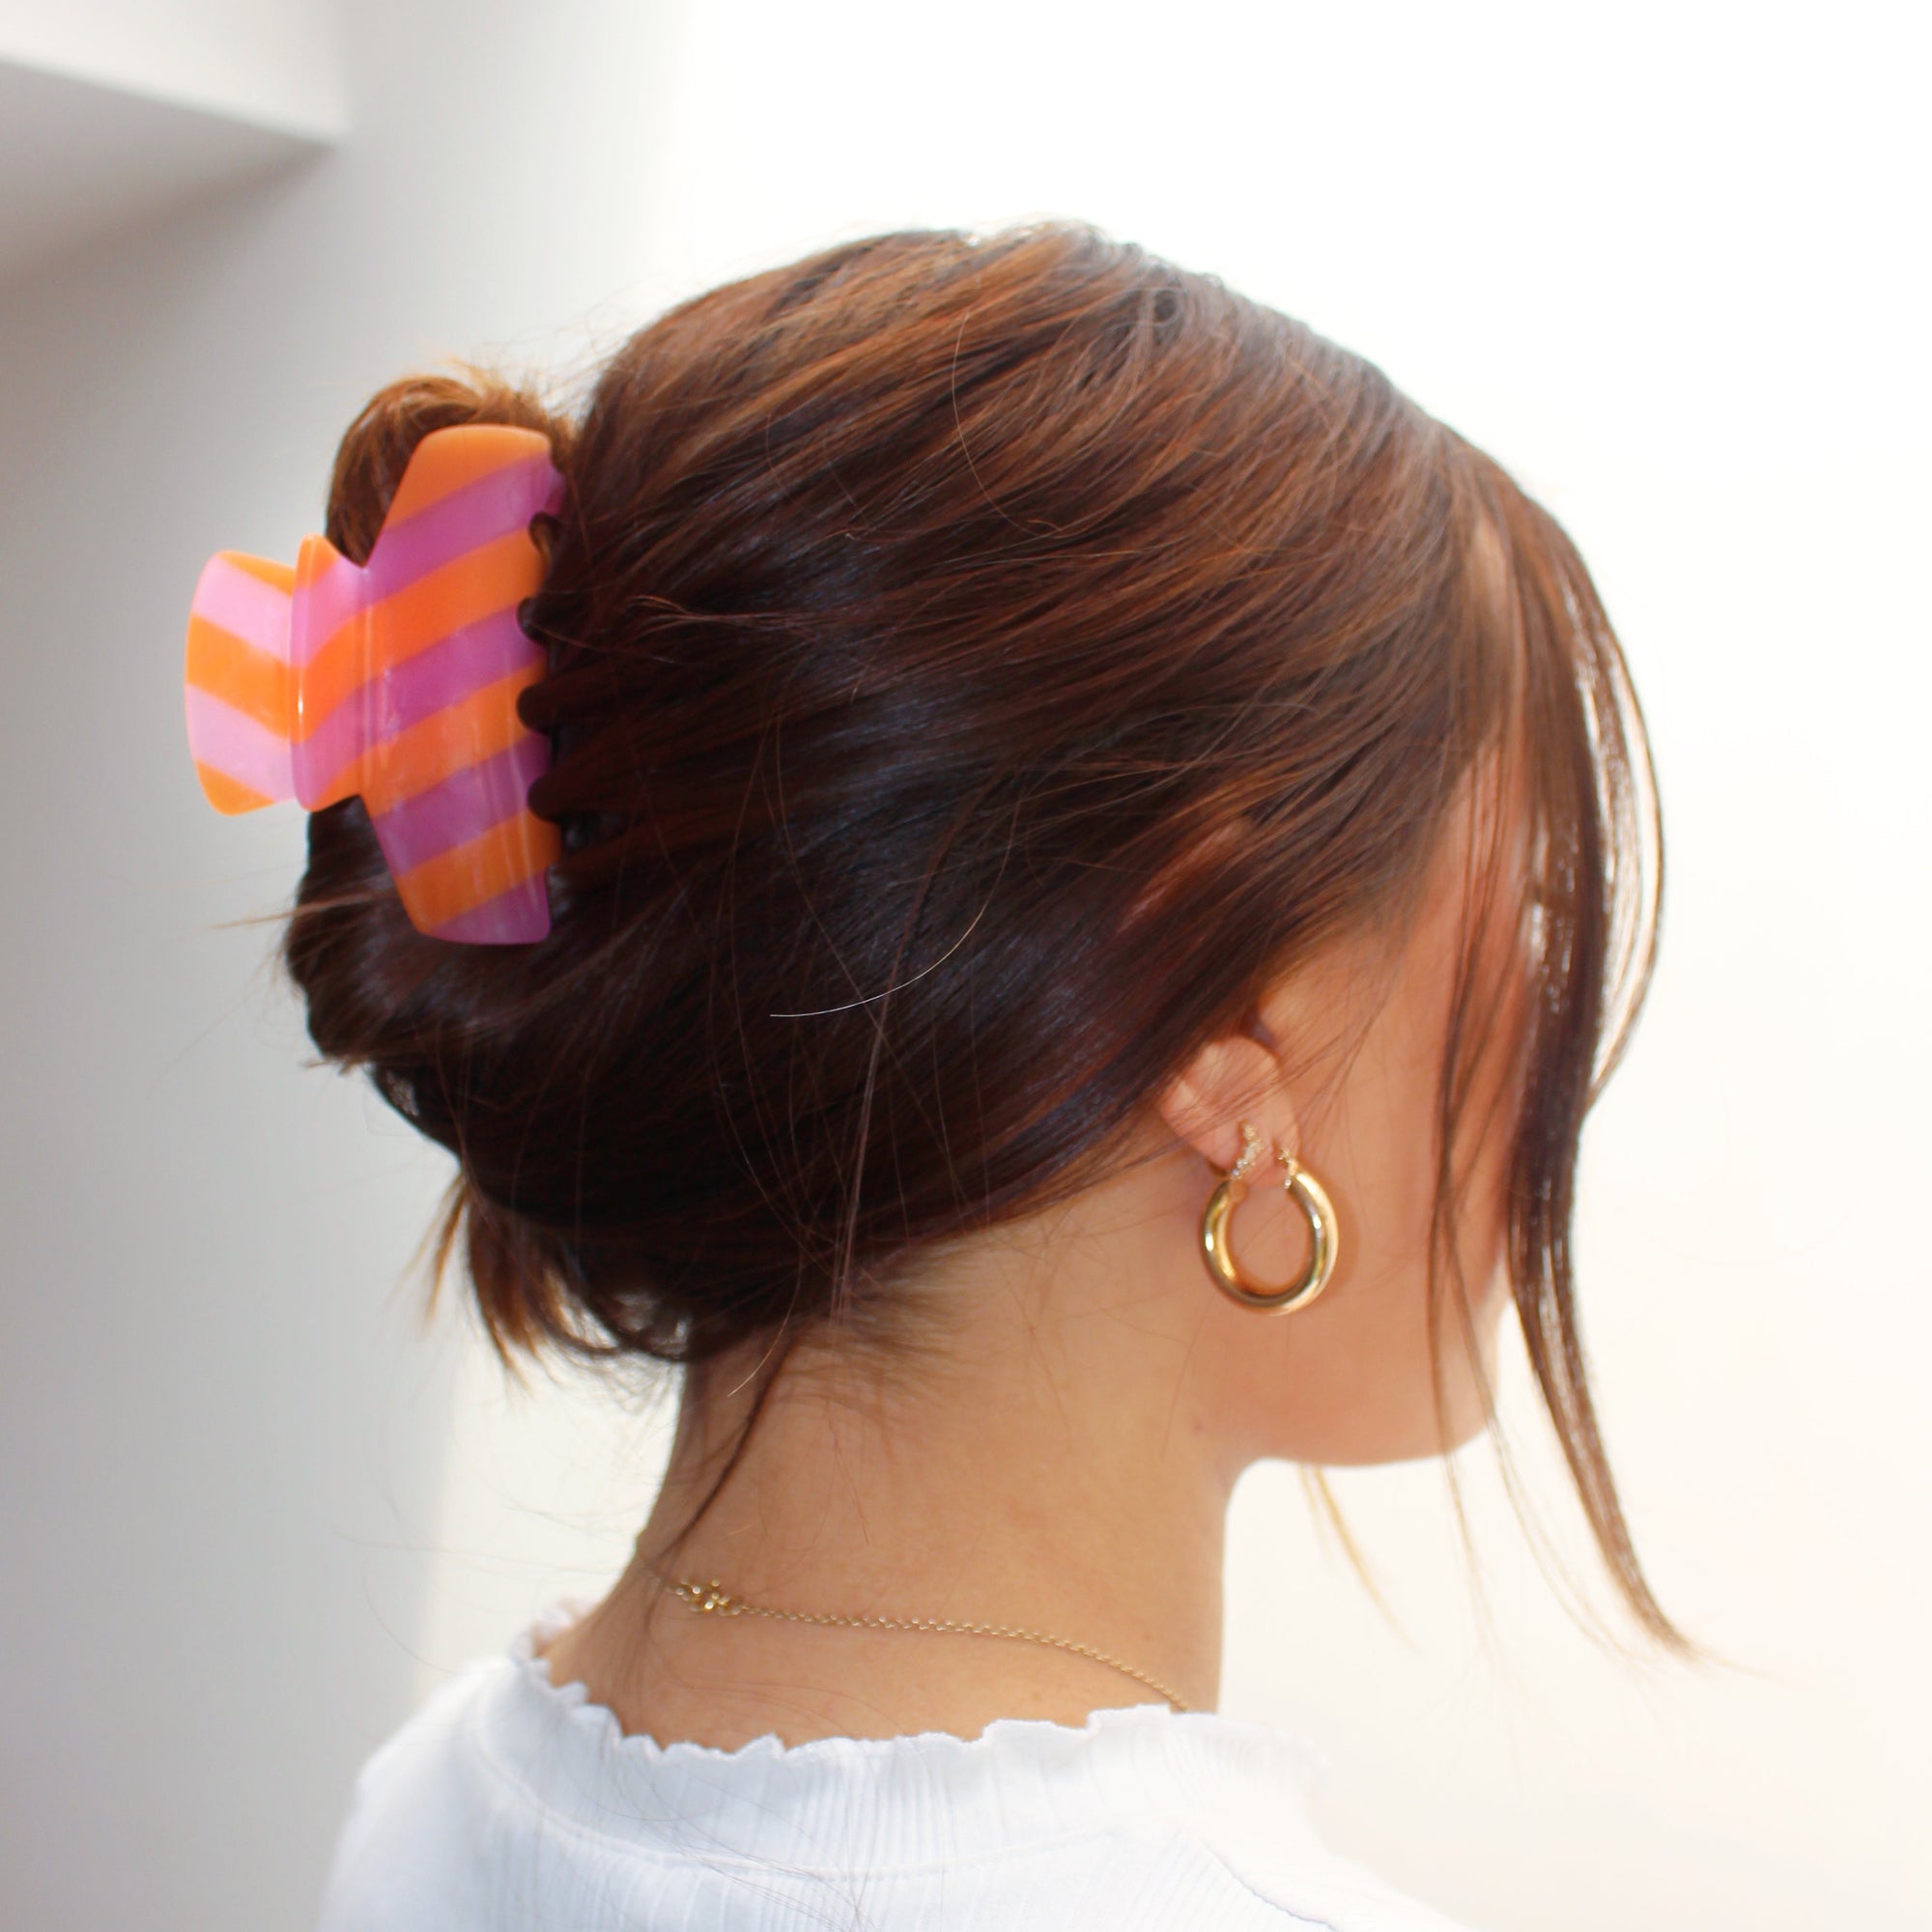 Meet LORA!  A medium sized silhouette claw in our signature stripes. Two resin patterns are merged together to create a colour combinations of dreams. The medium size makes it very easy to use and perfect for an all up look or securing a bun. For shorter hair it can be used for an all up look.  Each clip comes in a branded Tort pouch (colours change seasonally).  Size: 9cm  Colour: hot pink and orange stripe  Material: eco-resin